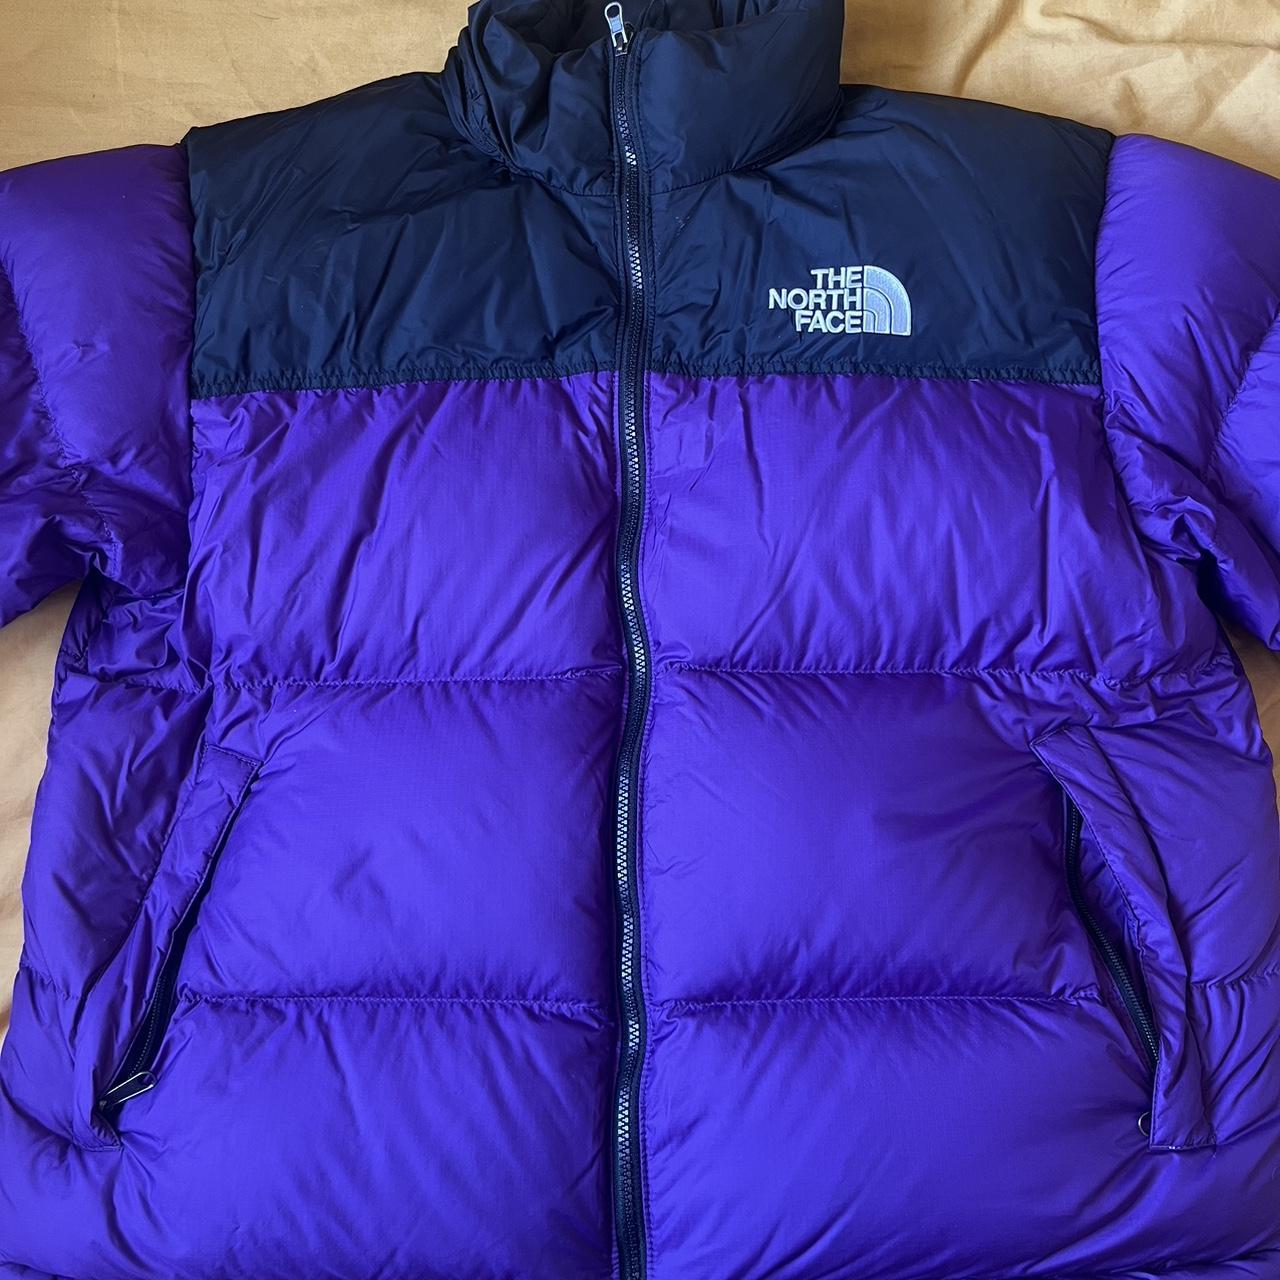 XL The north face puffa, brand new only worn once or... - Depop